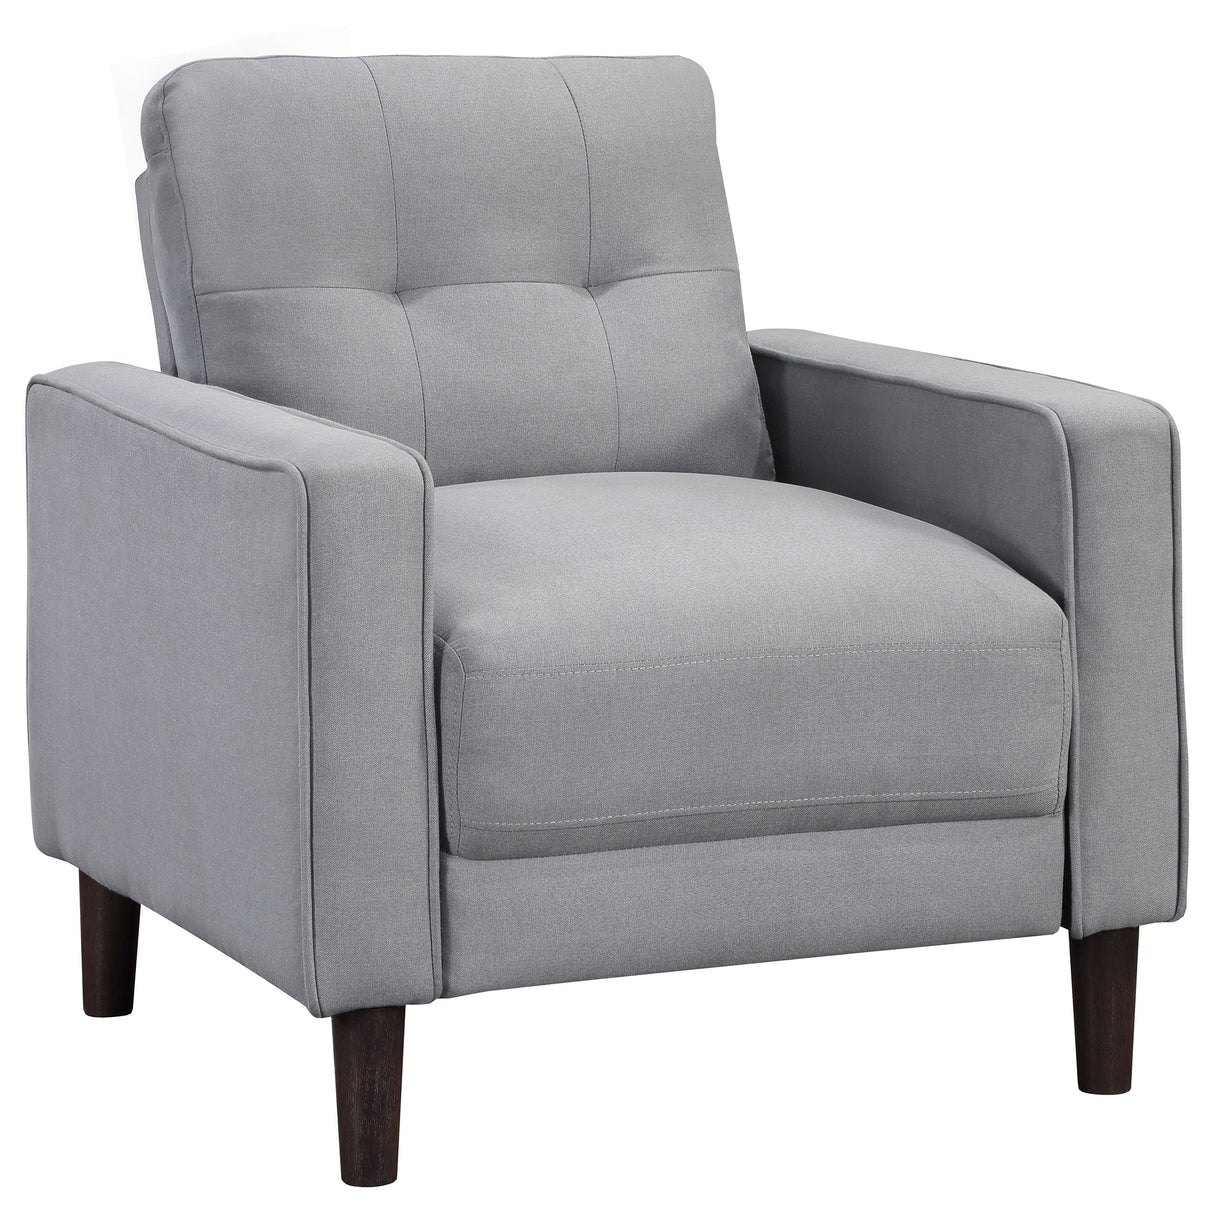 Chair - Bowen Upholstered Track Arms Tufted Chair Grey